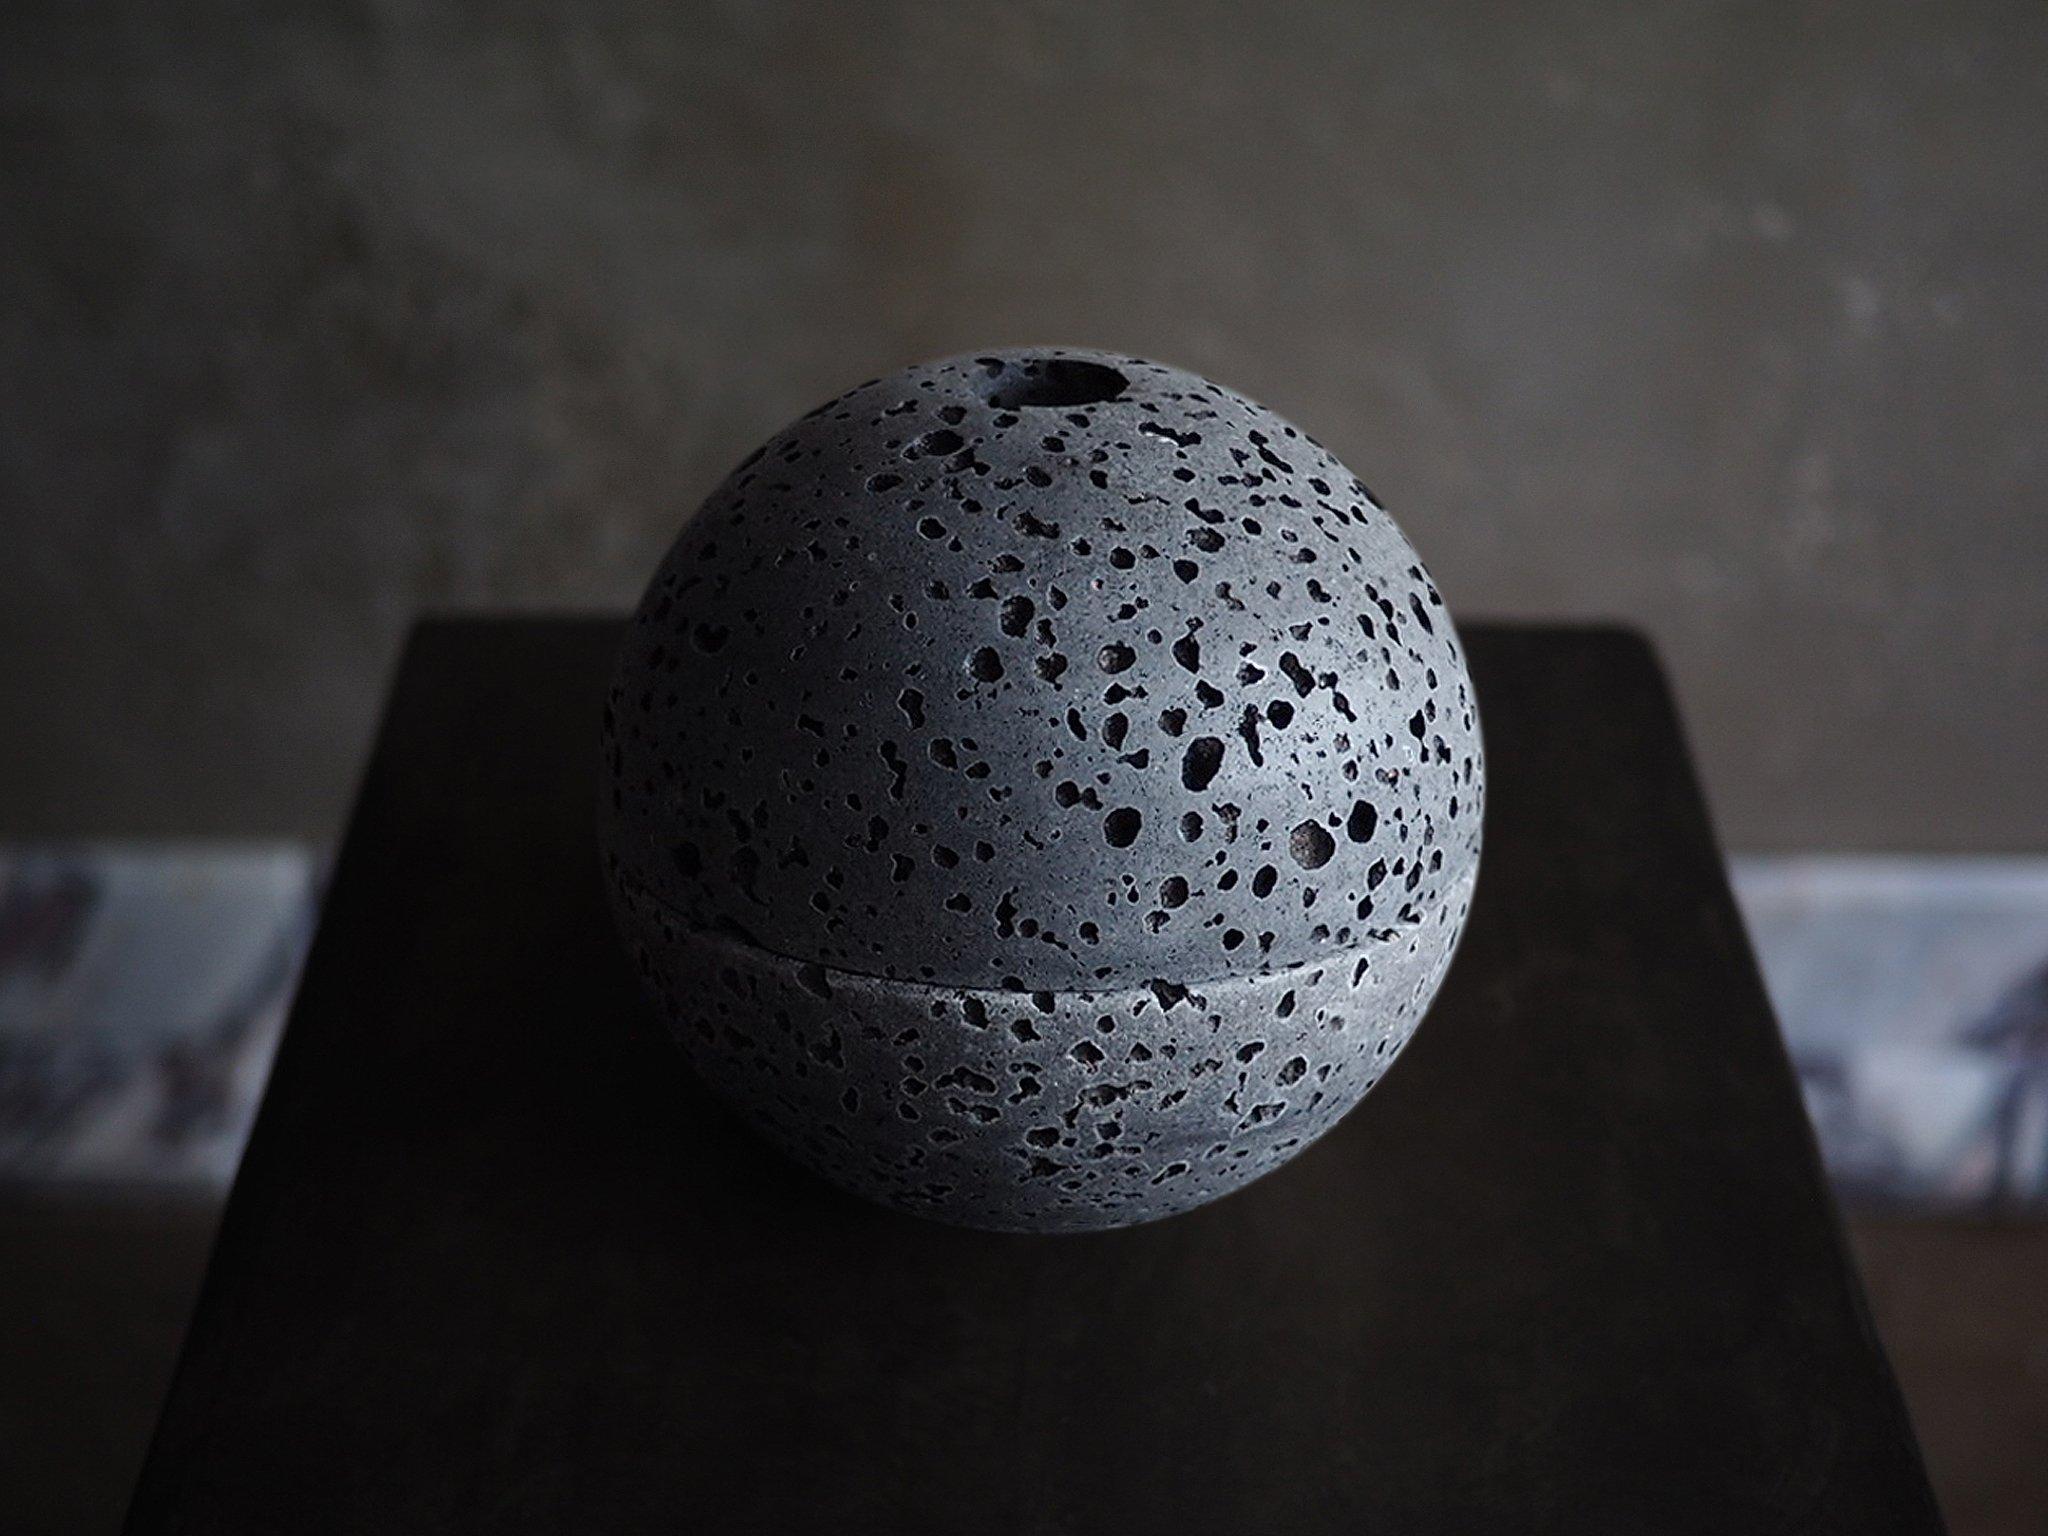 Sculpted from solid blocks of unfilled beige travertine, sphere censer by Brendan Tadler. Minimalist in form, the Sphere Censer acts as a quiet object to stimulate creativity and focus when activated with incense or sage. Inside the sphere, burn